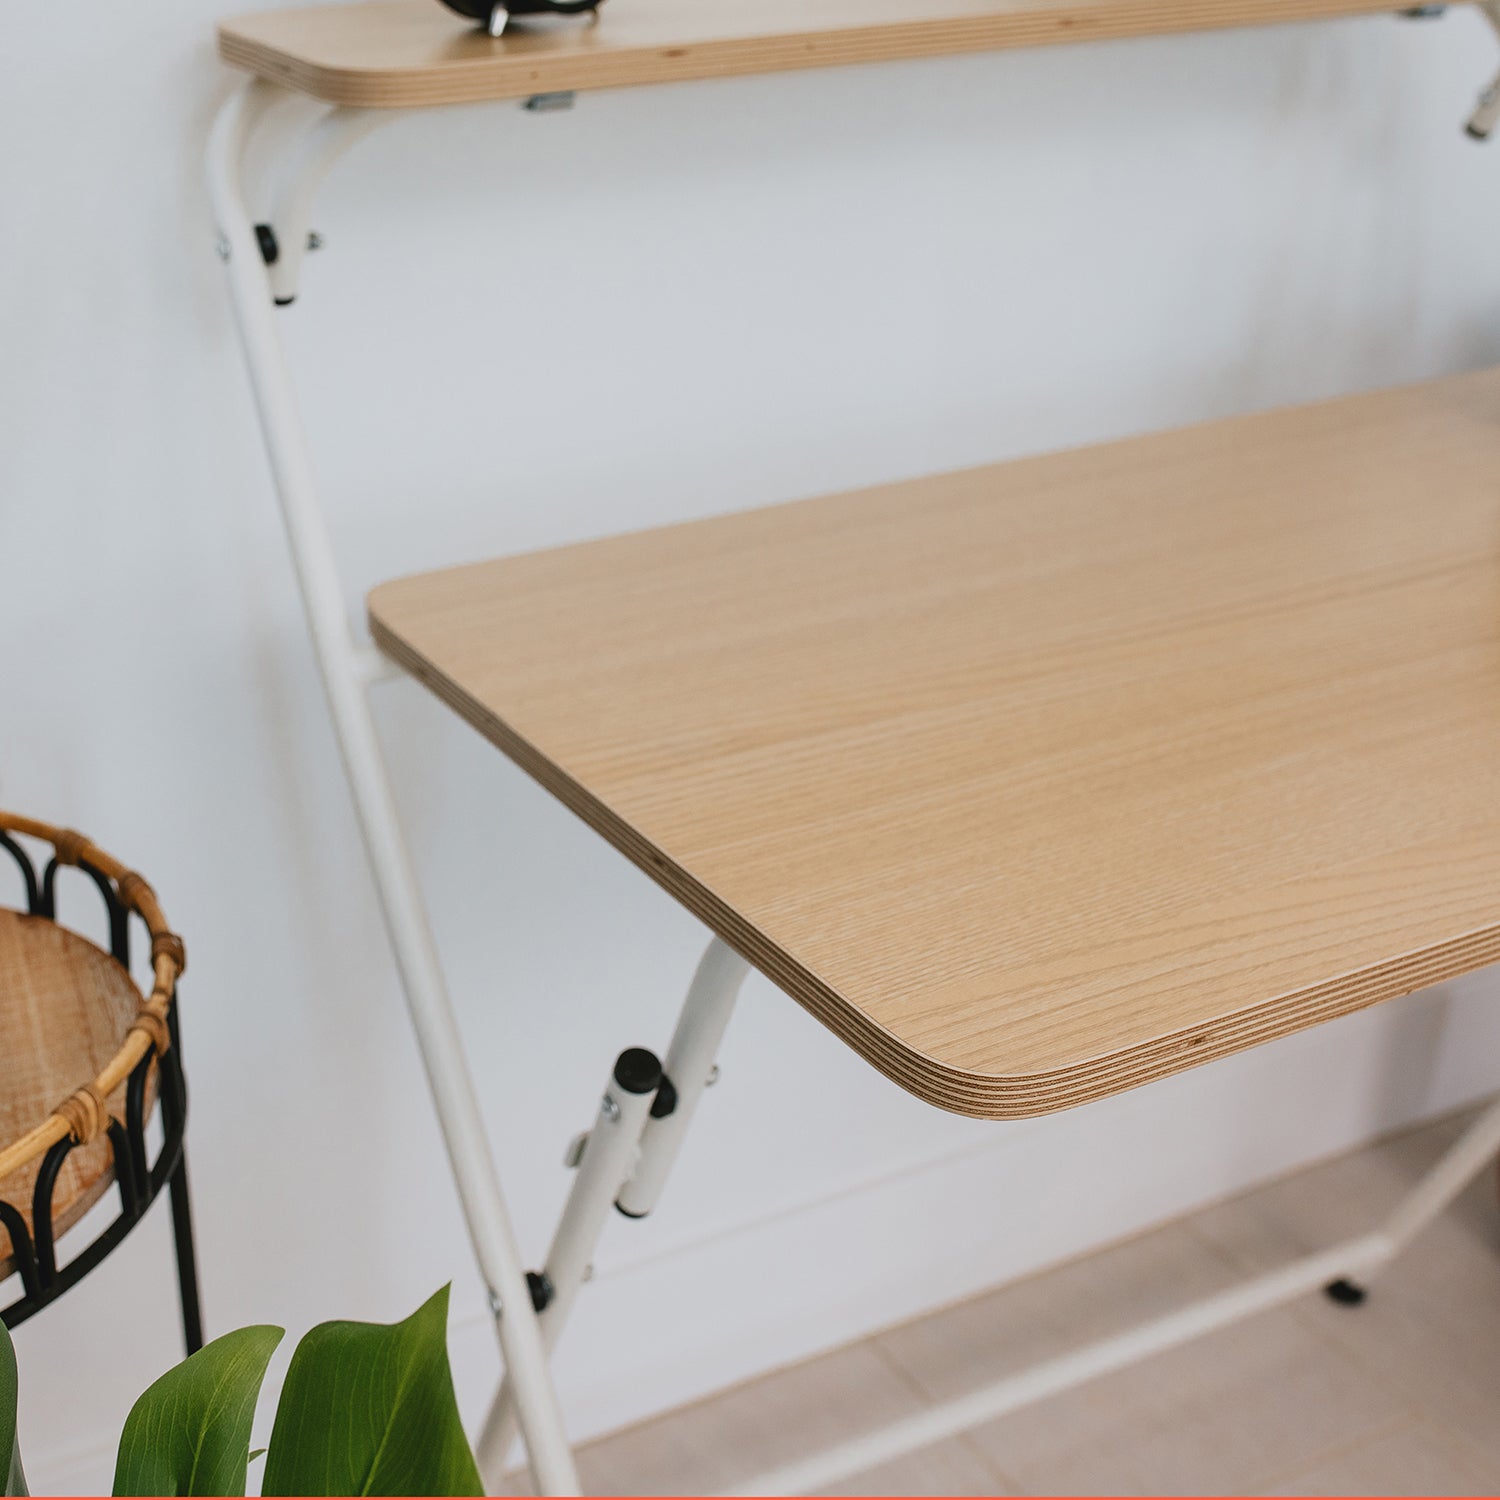 SOFSYS simple modern folding desk with oak table top and white metal frame. versatile, stylish, and small space saving design